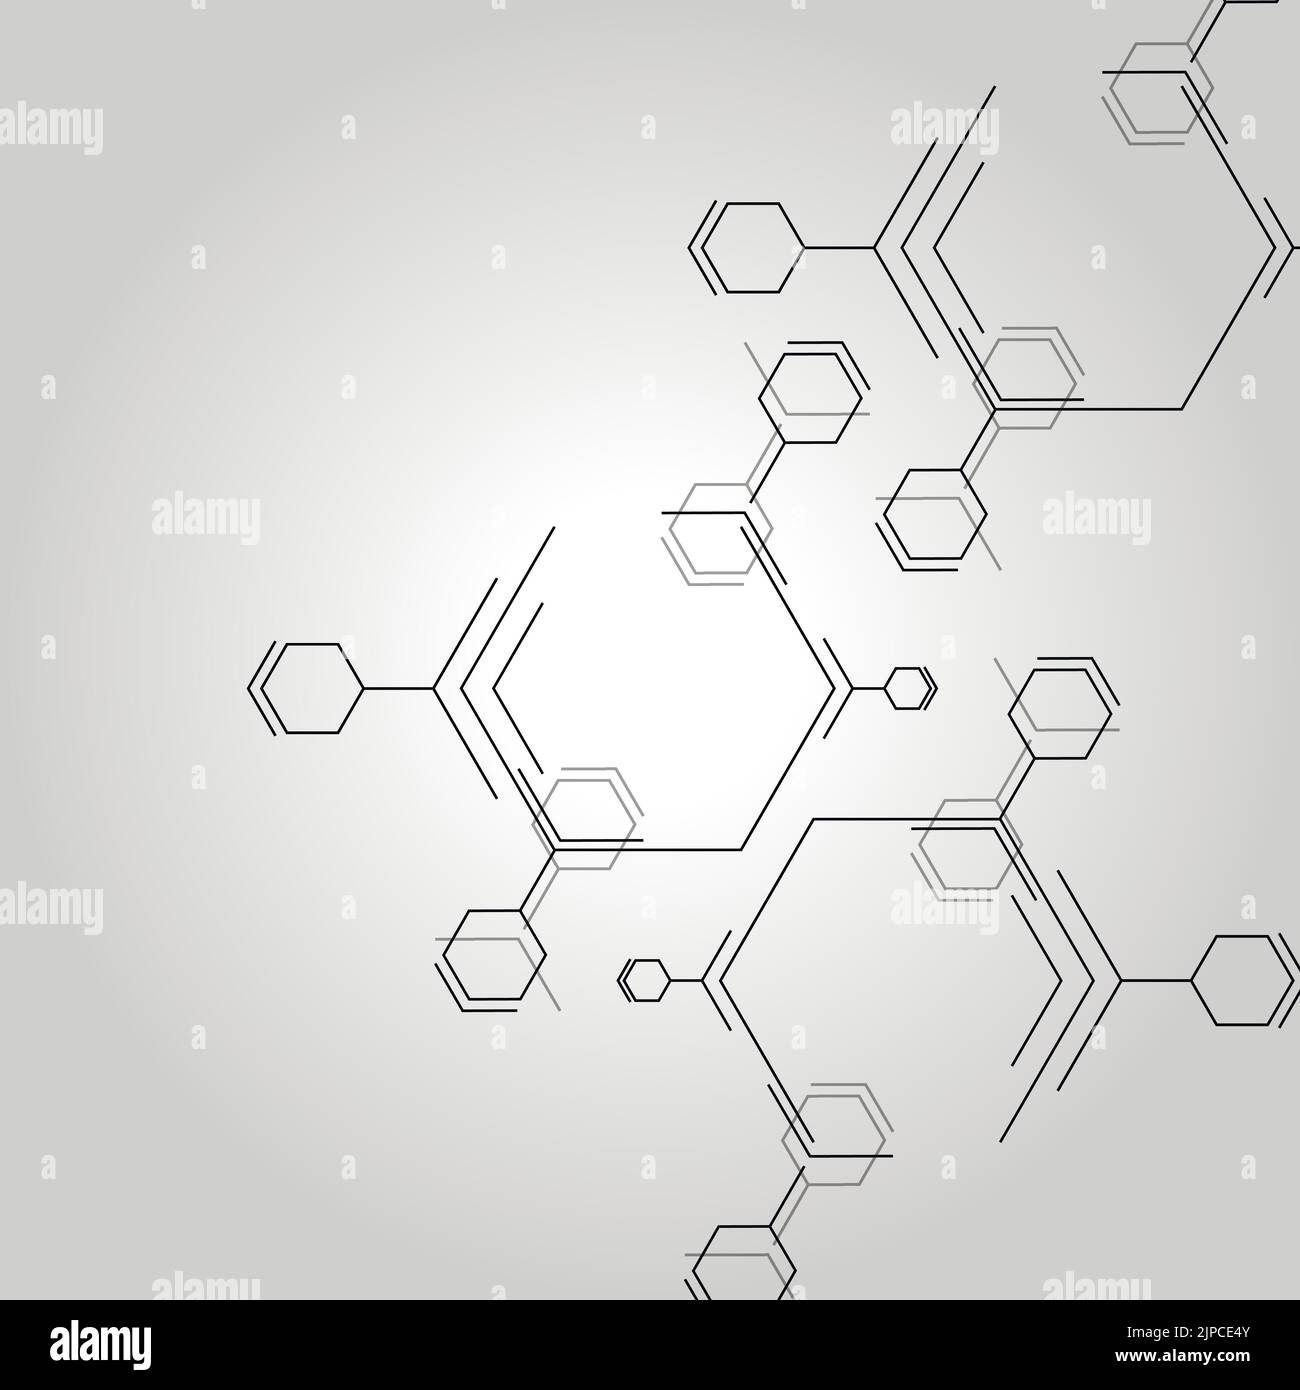 Connecting shapes on light background. Business network concept. Banner design. Geometric art. Medical technology science background Stock Vector